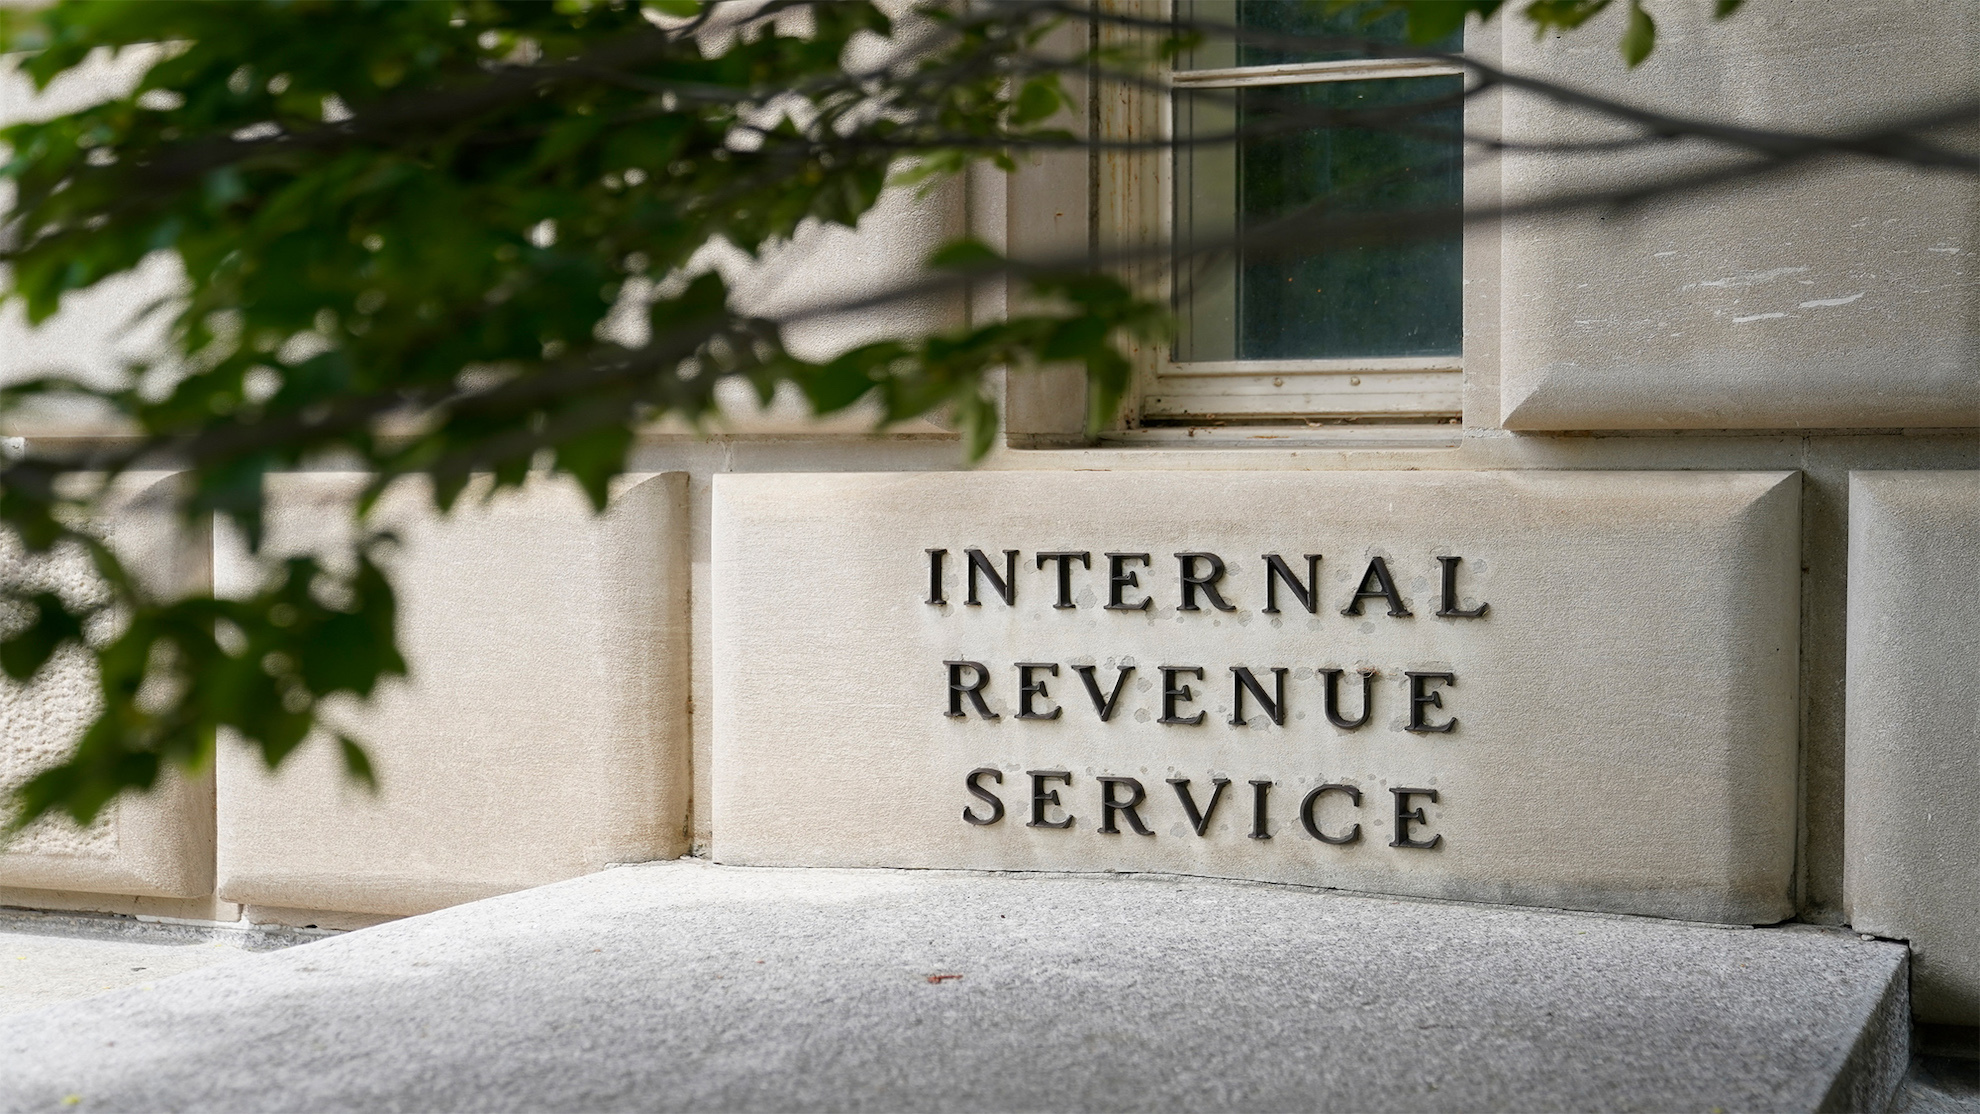 Irs 2022 Schedule 4 Irs Tax Refund Deposit Dates 2022: When Is The Irs Sending Refunds? | Marca